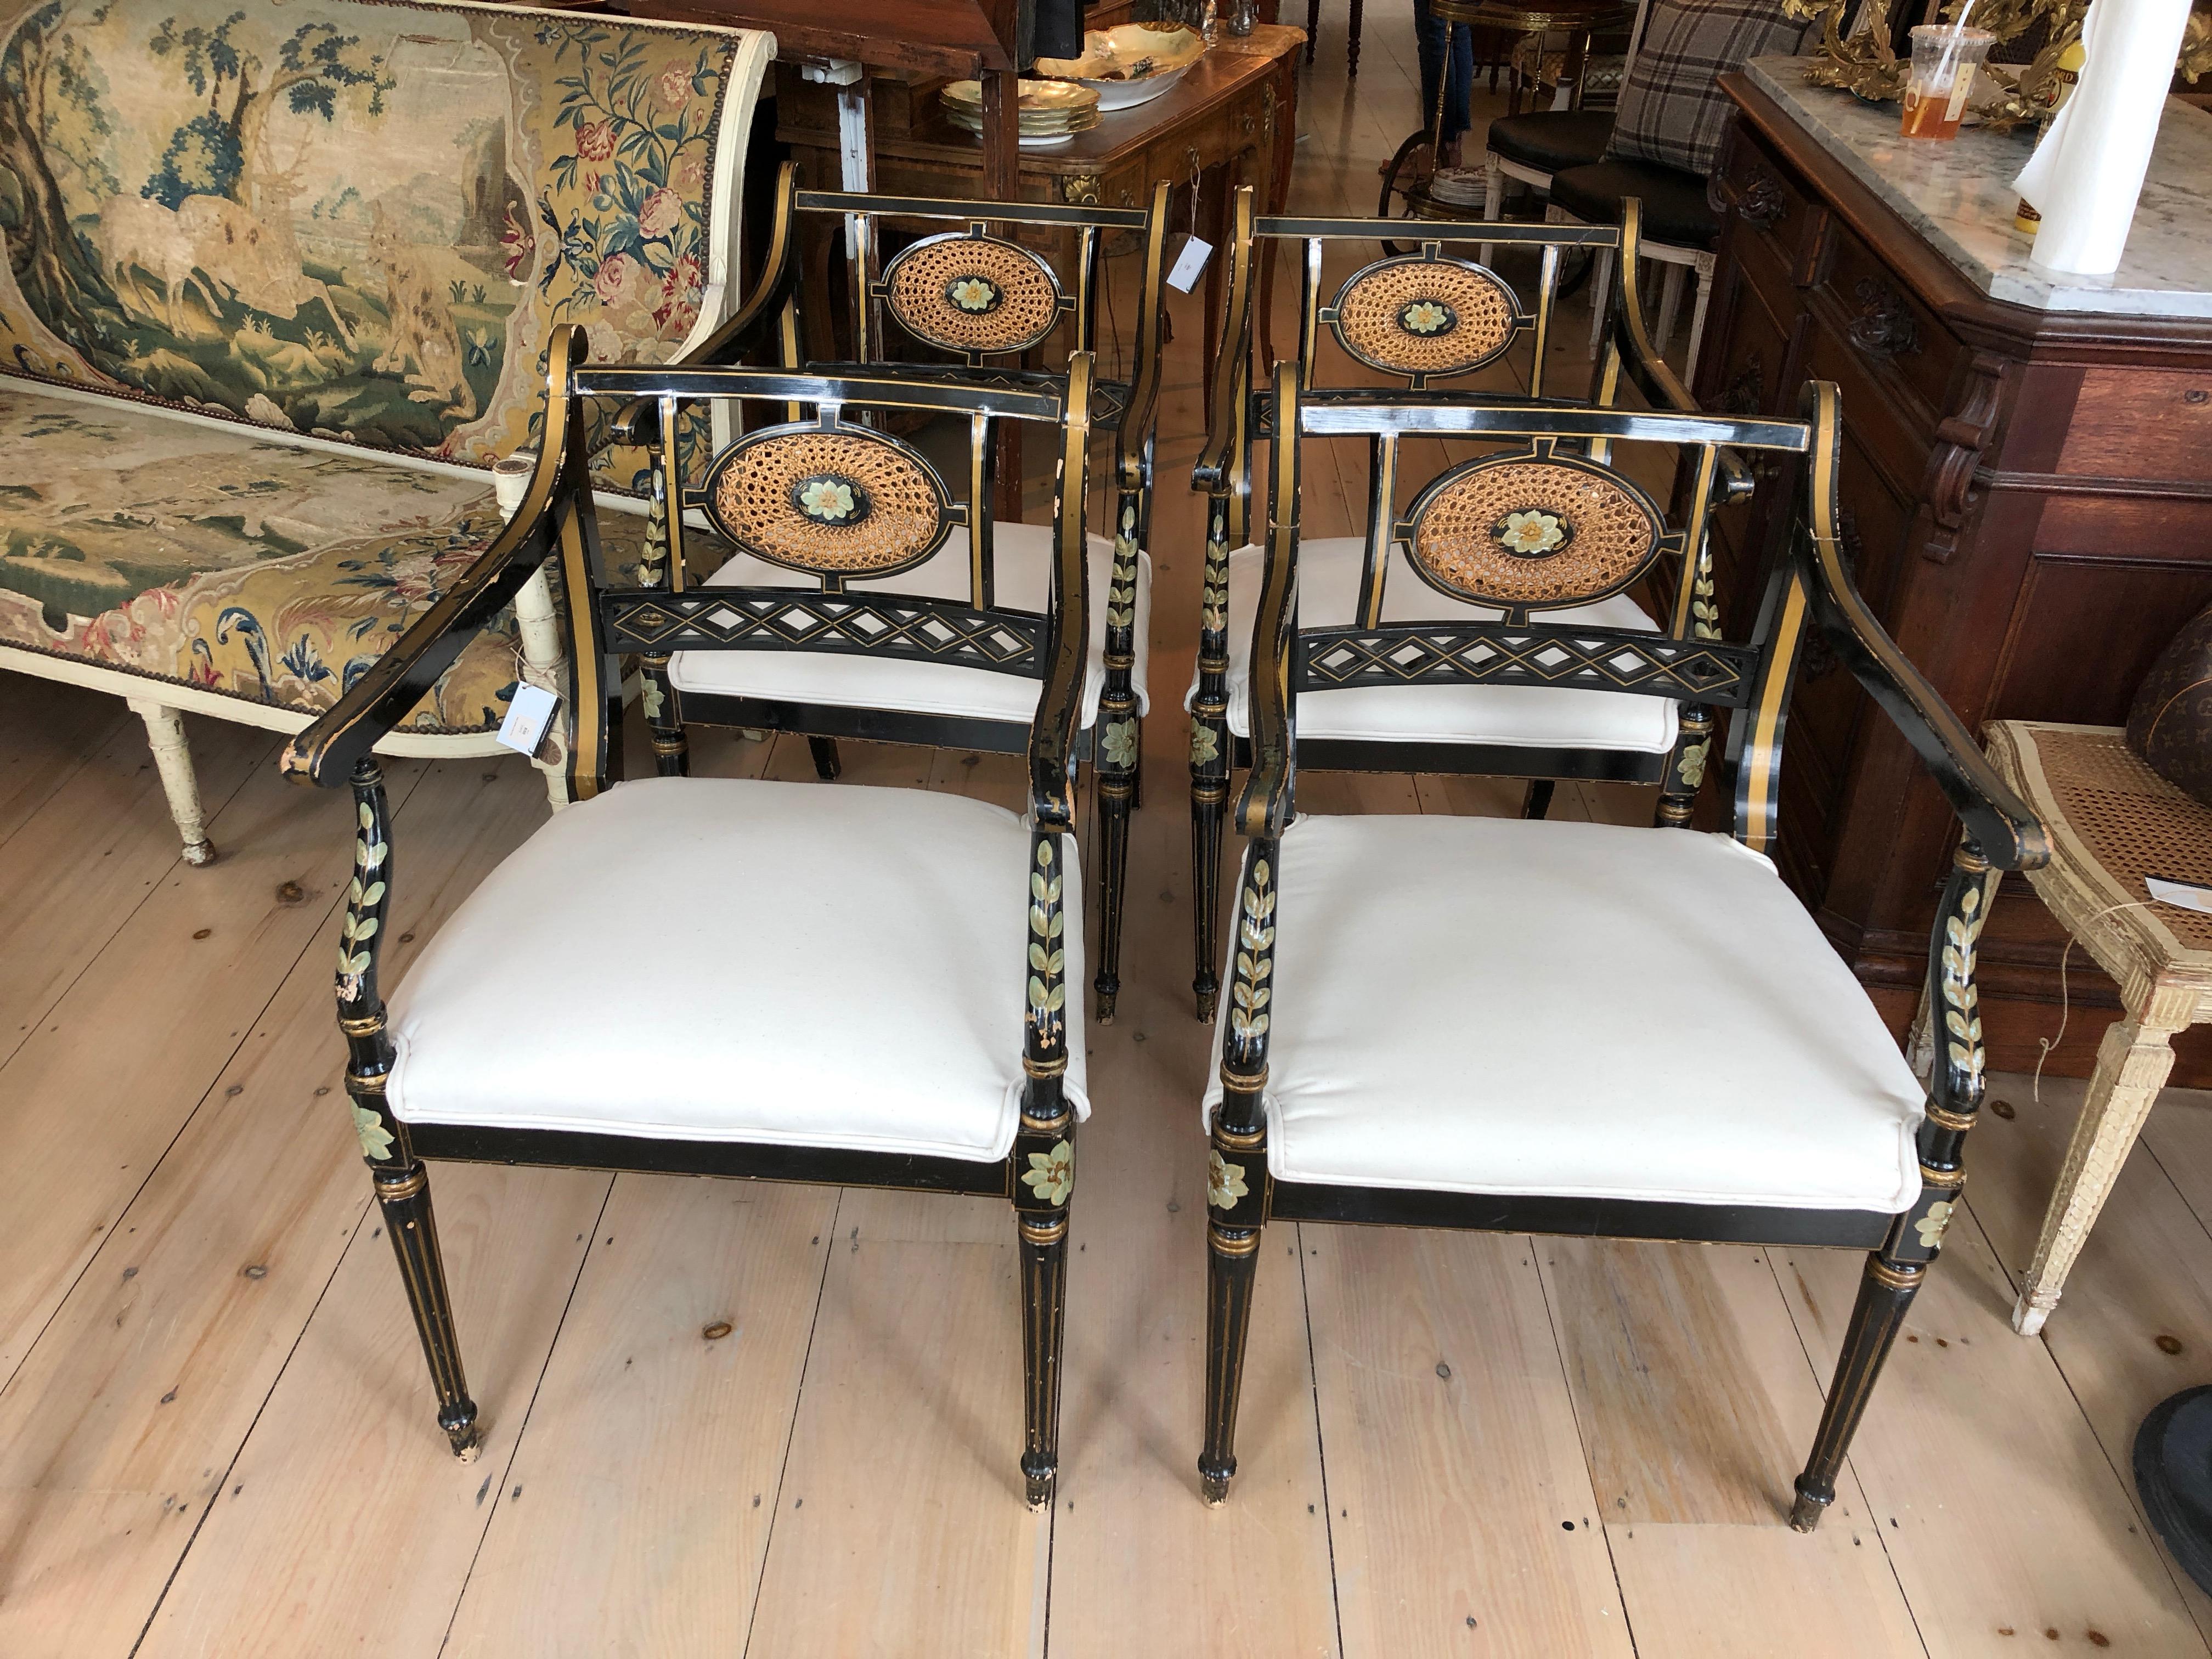 Elegant and glamorous set of four Regency armchairs having black laquered background with lovely handpainted foliage in sage green and gold. The backs have spectacular oval caned medallions with sage green and gold flowers in the center. Newly